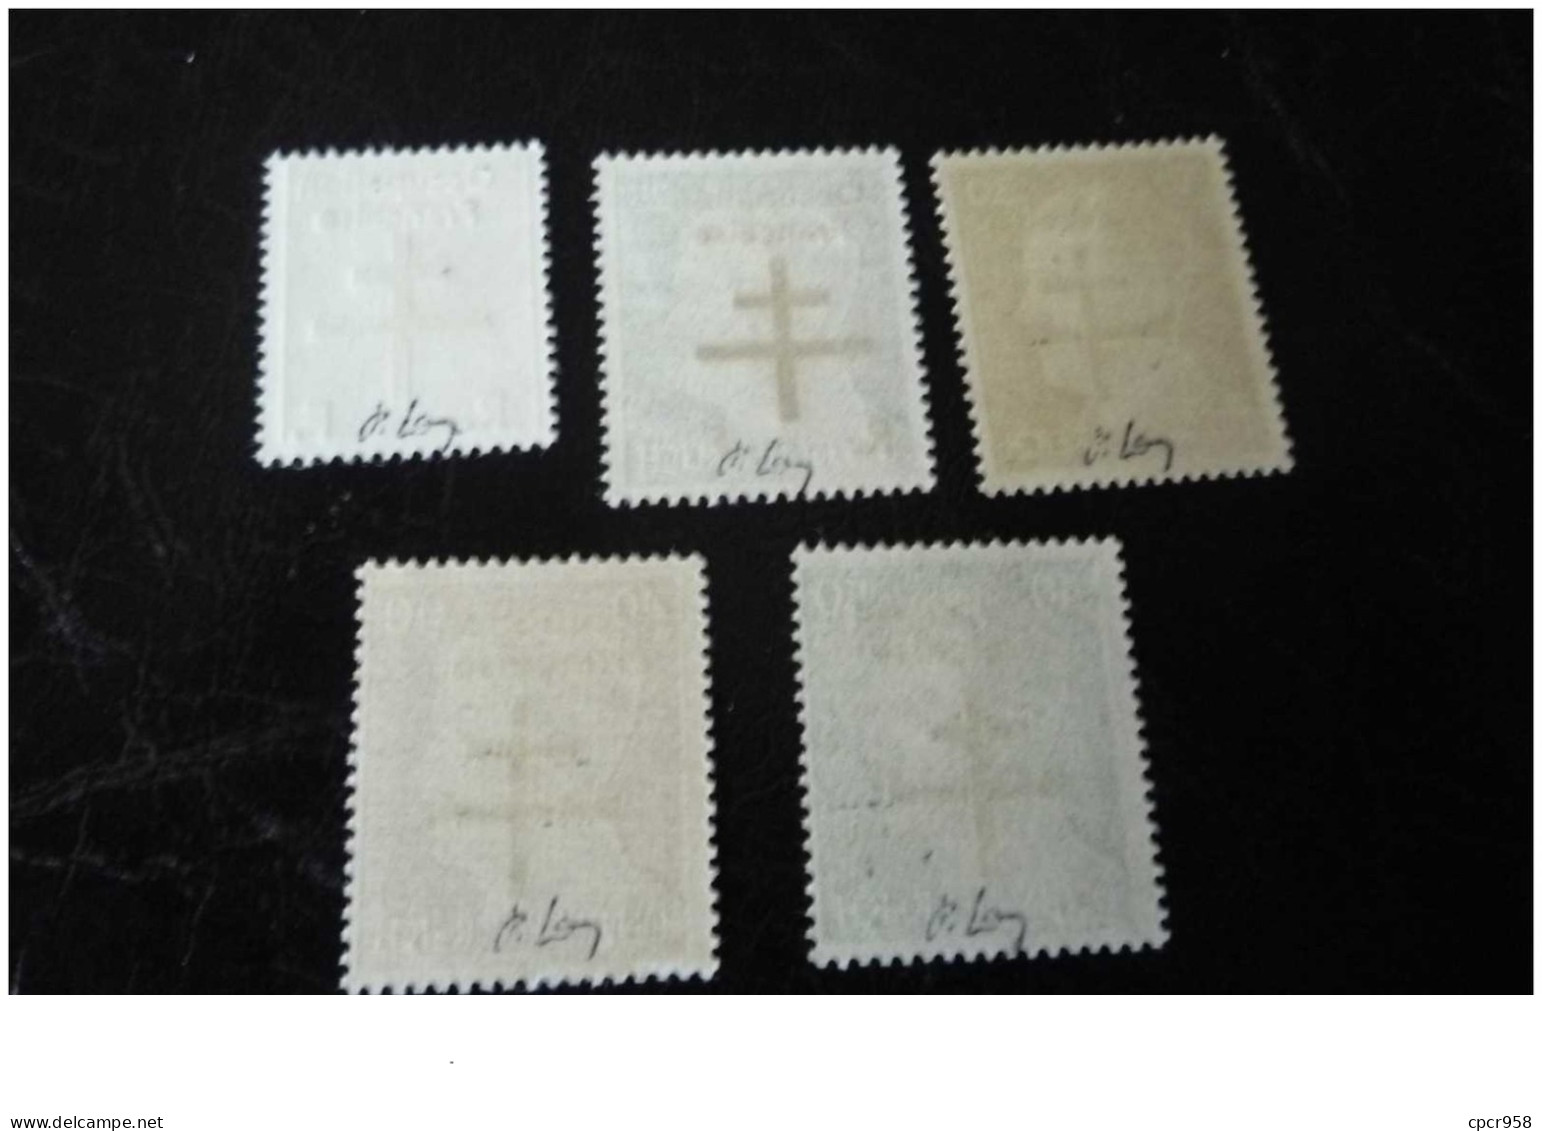 Timbres France . N°38672 . France.OCCUPATION FRANCAISE.HITLE.n°1 ET N°5 A 8.NEUF SANS CHARNIERES. TIMBRES SIGNEE. - Bevrijding